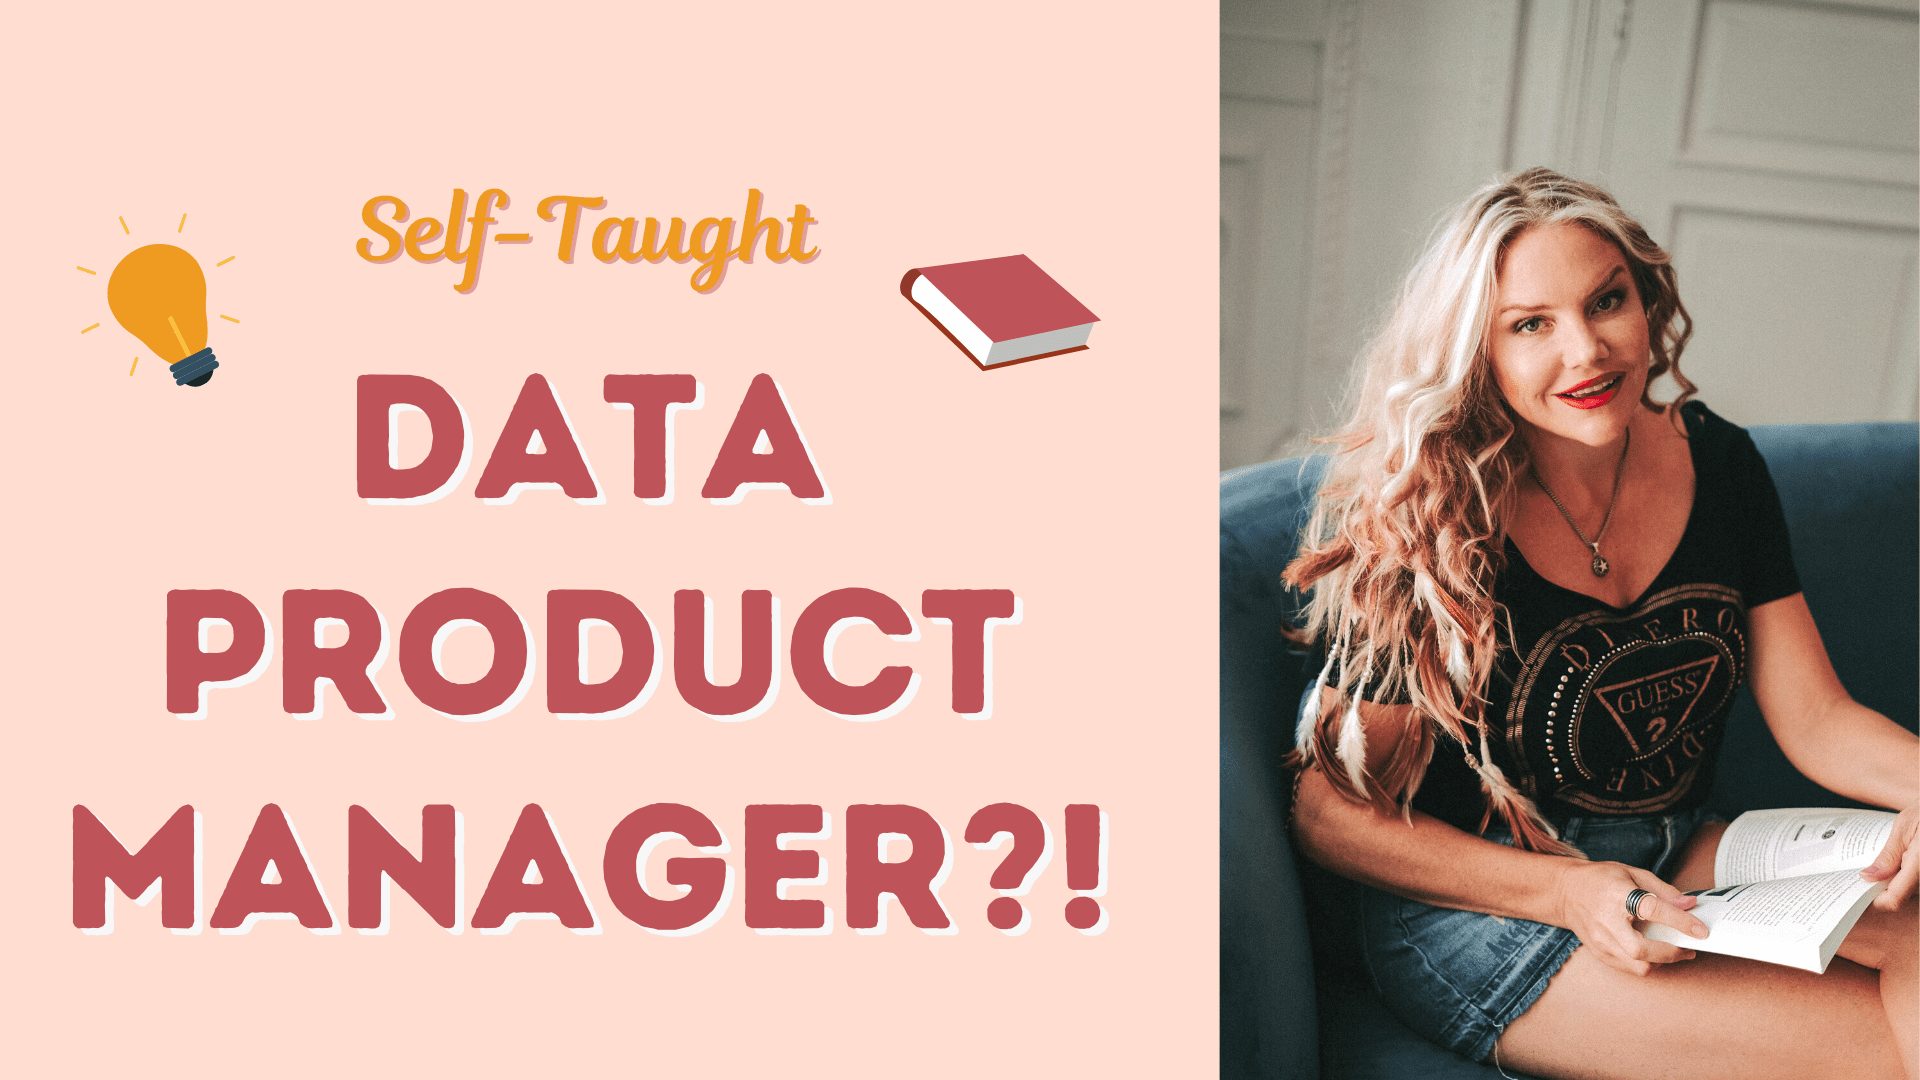 a guide to a Self-taught Data Product Manager appraoch